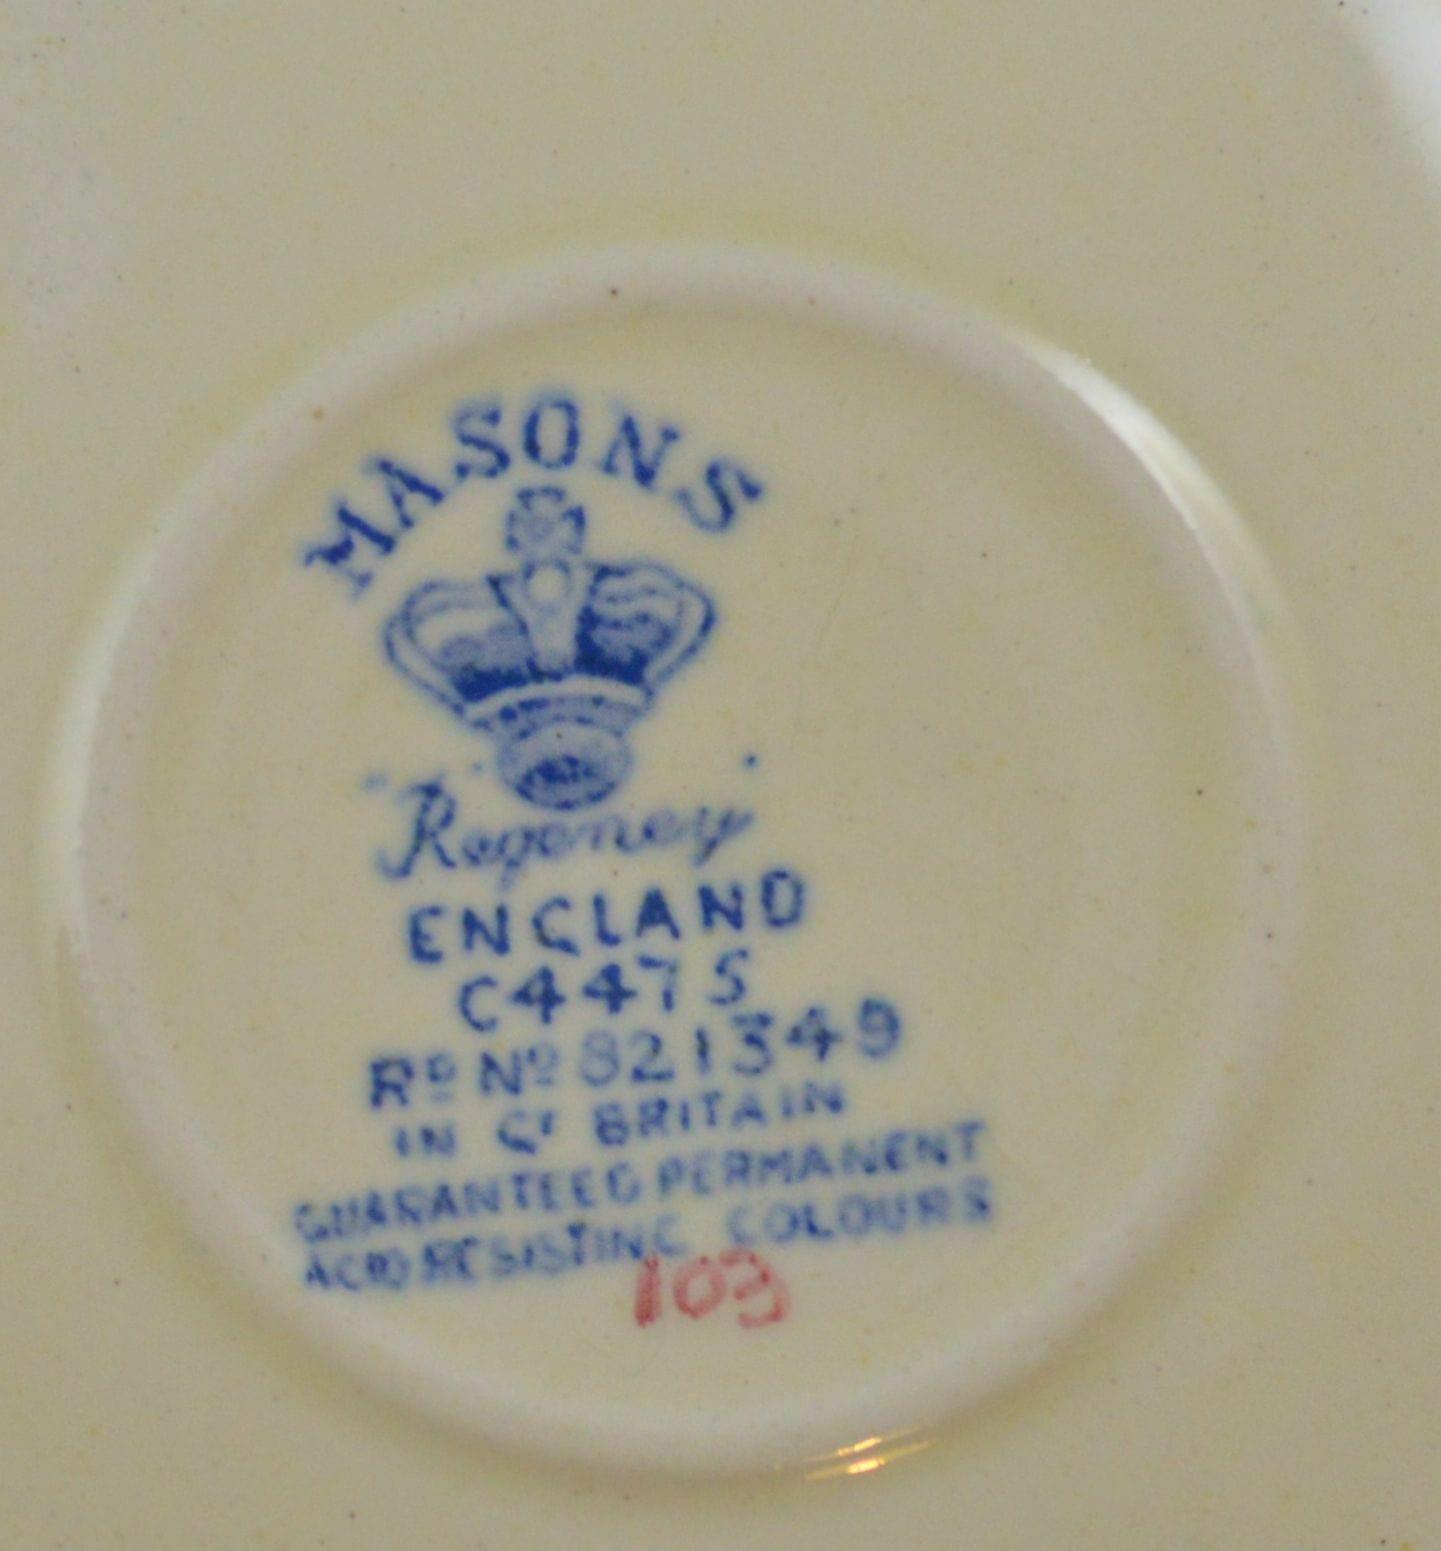 TABLEWARE MASONS REGENCY SAUCER(PREVIOUSLY OWNED) FAIRLY GOOD CONDITION - TMD167207